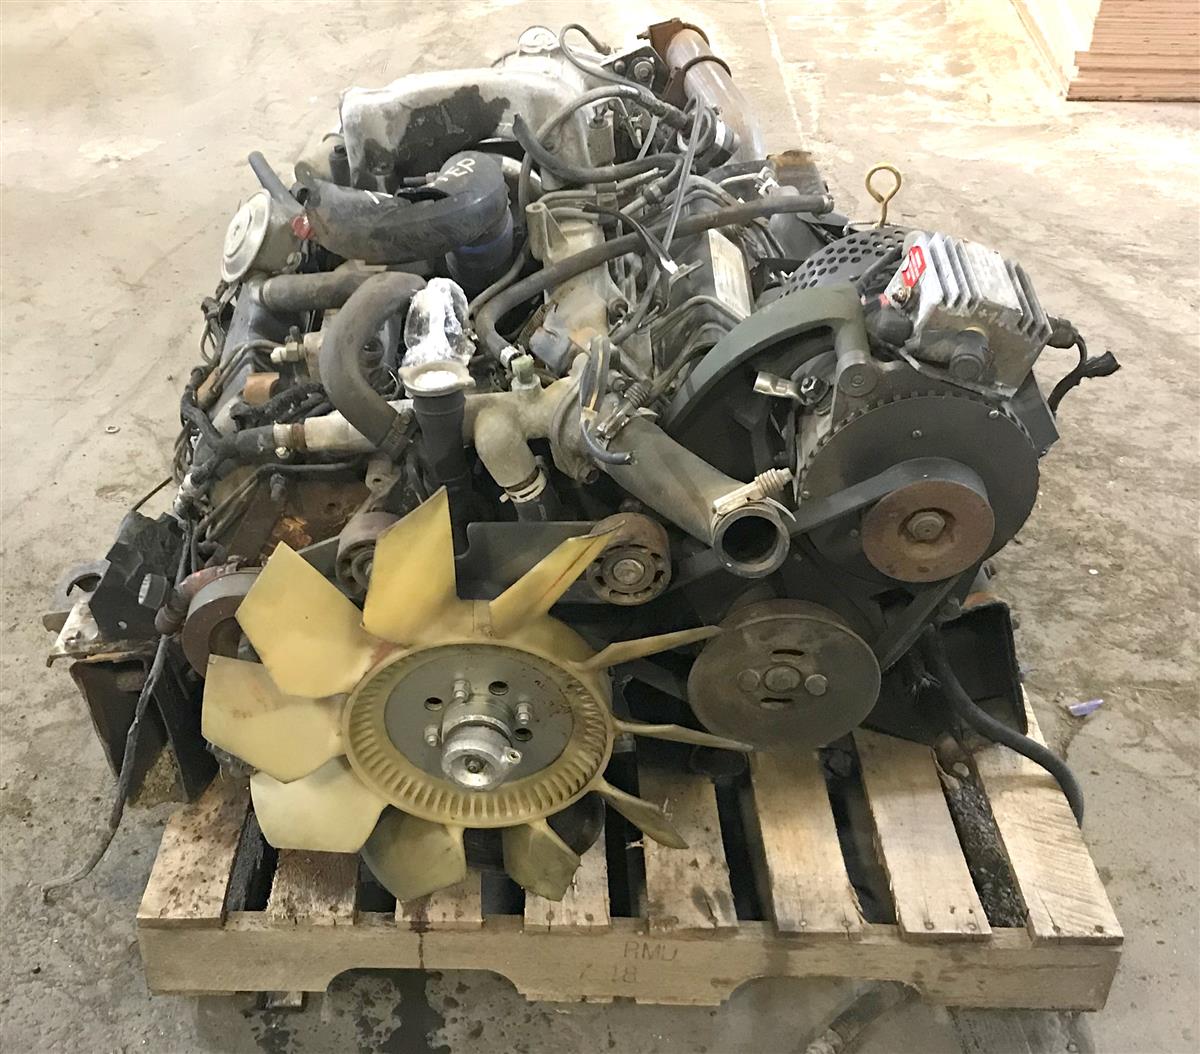 HM-1239 | HM-1239  6.5 Liter Engine with 4 Speed Transmission and Transfer Case (Turbo) (9).JPG